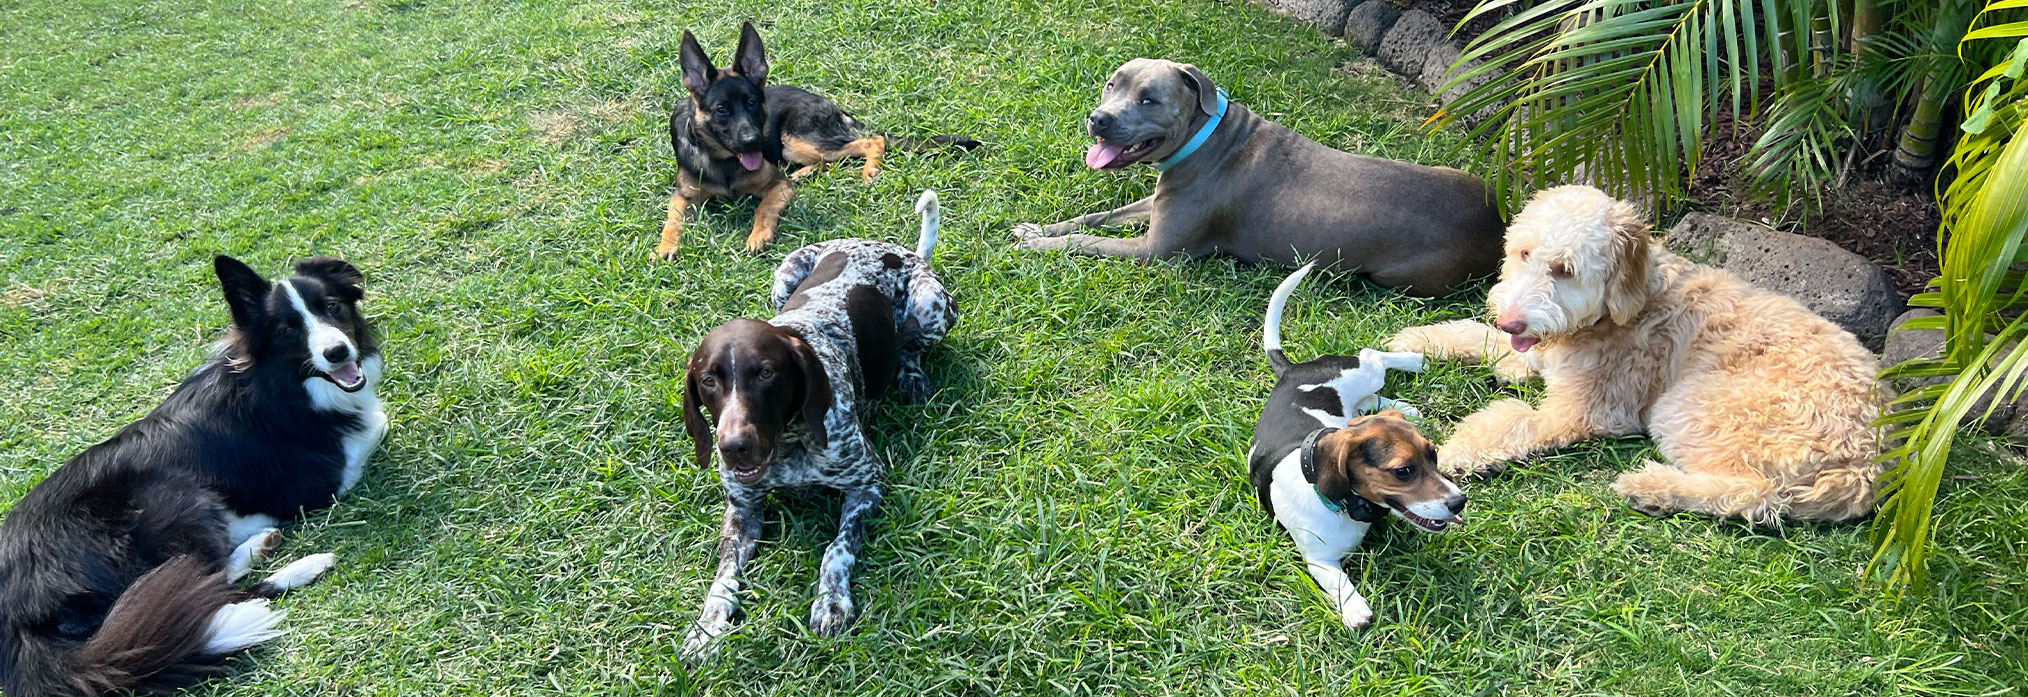 Group of dogs on the lawn